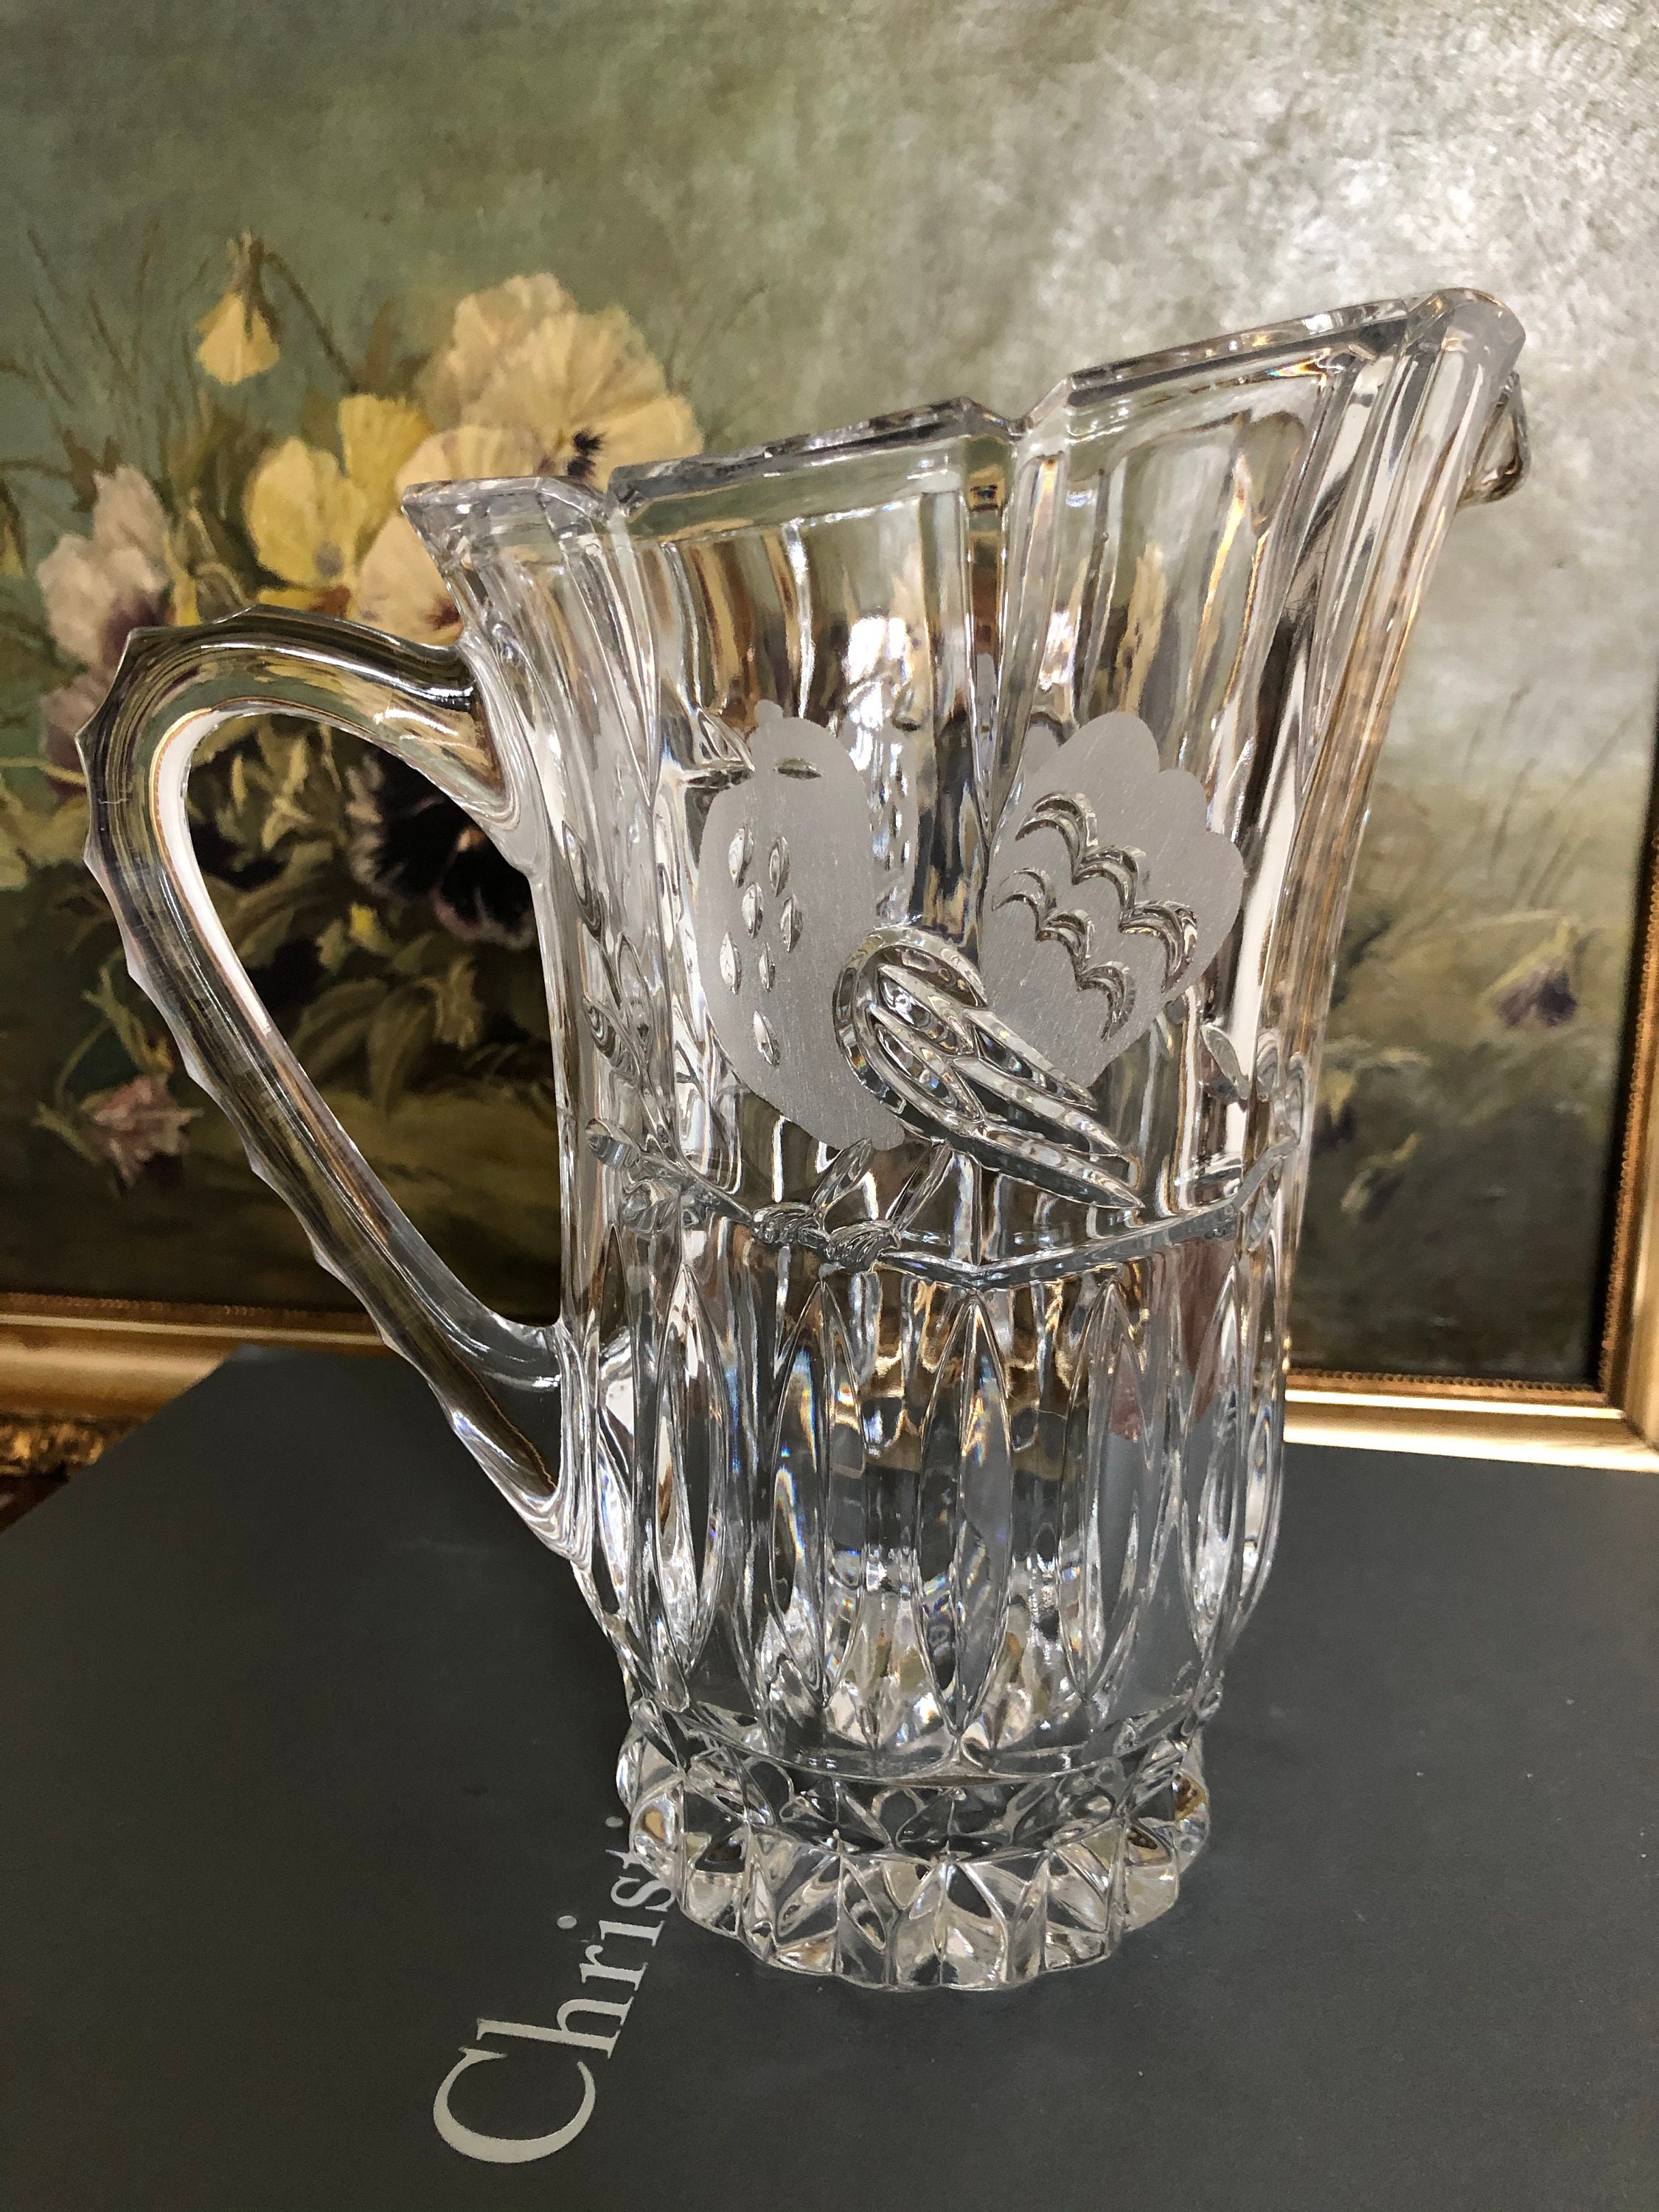 The European Collection Vintage Crystal Pitcher with Etched Bird Design